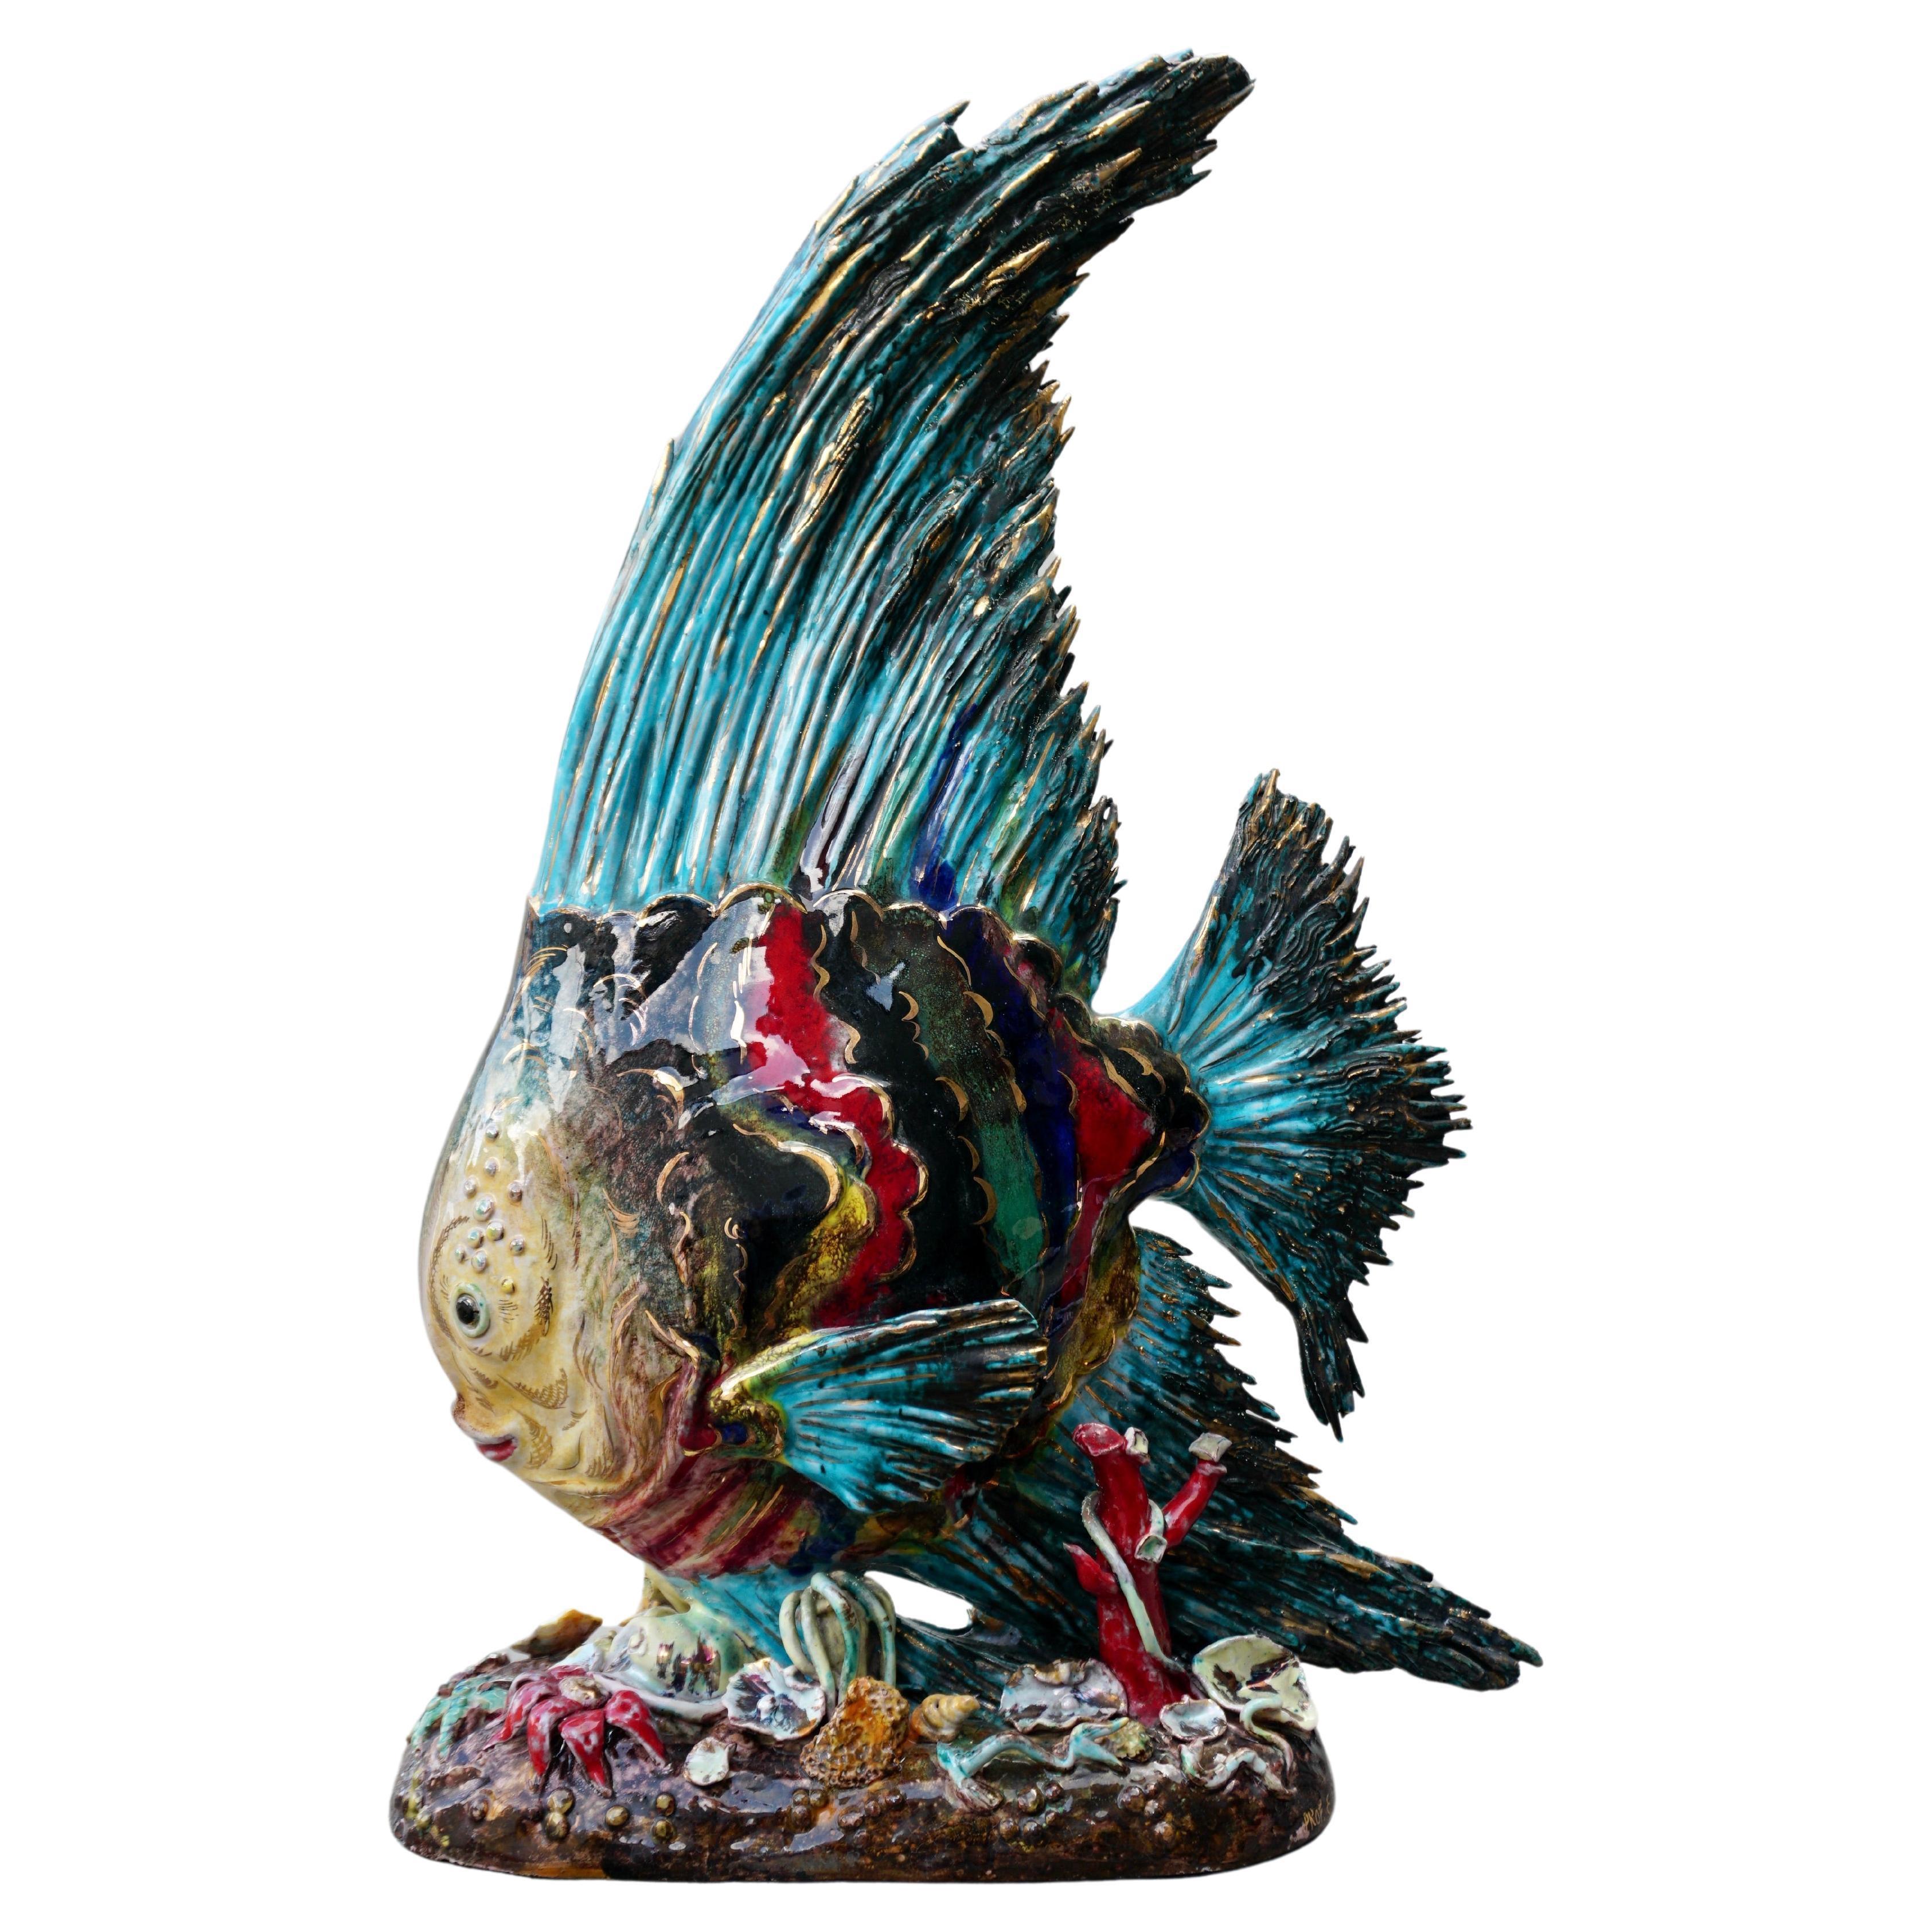 Glazed Larger than Life Figural Fish Lamp by E. Pattarino for Marbro For Sale